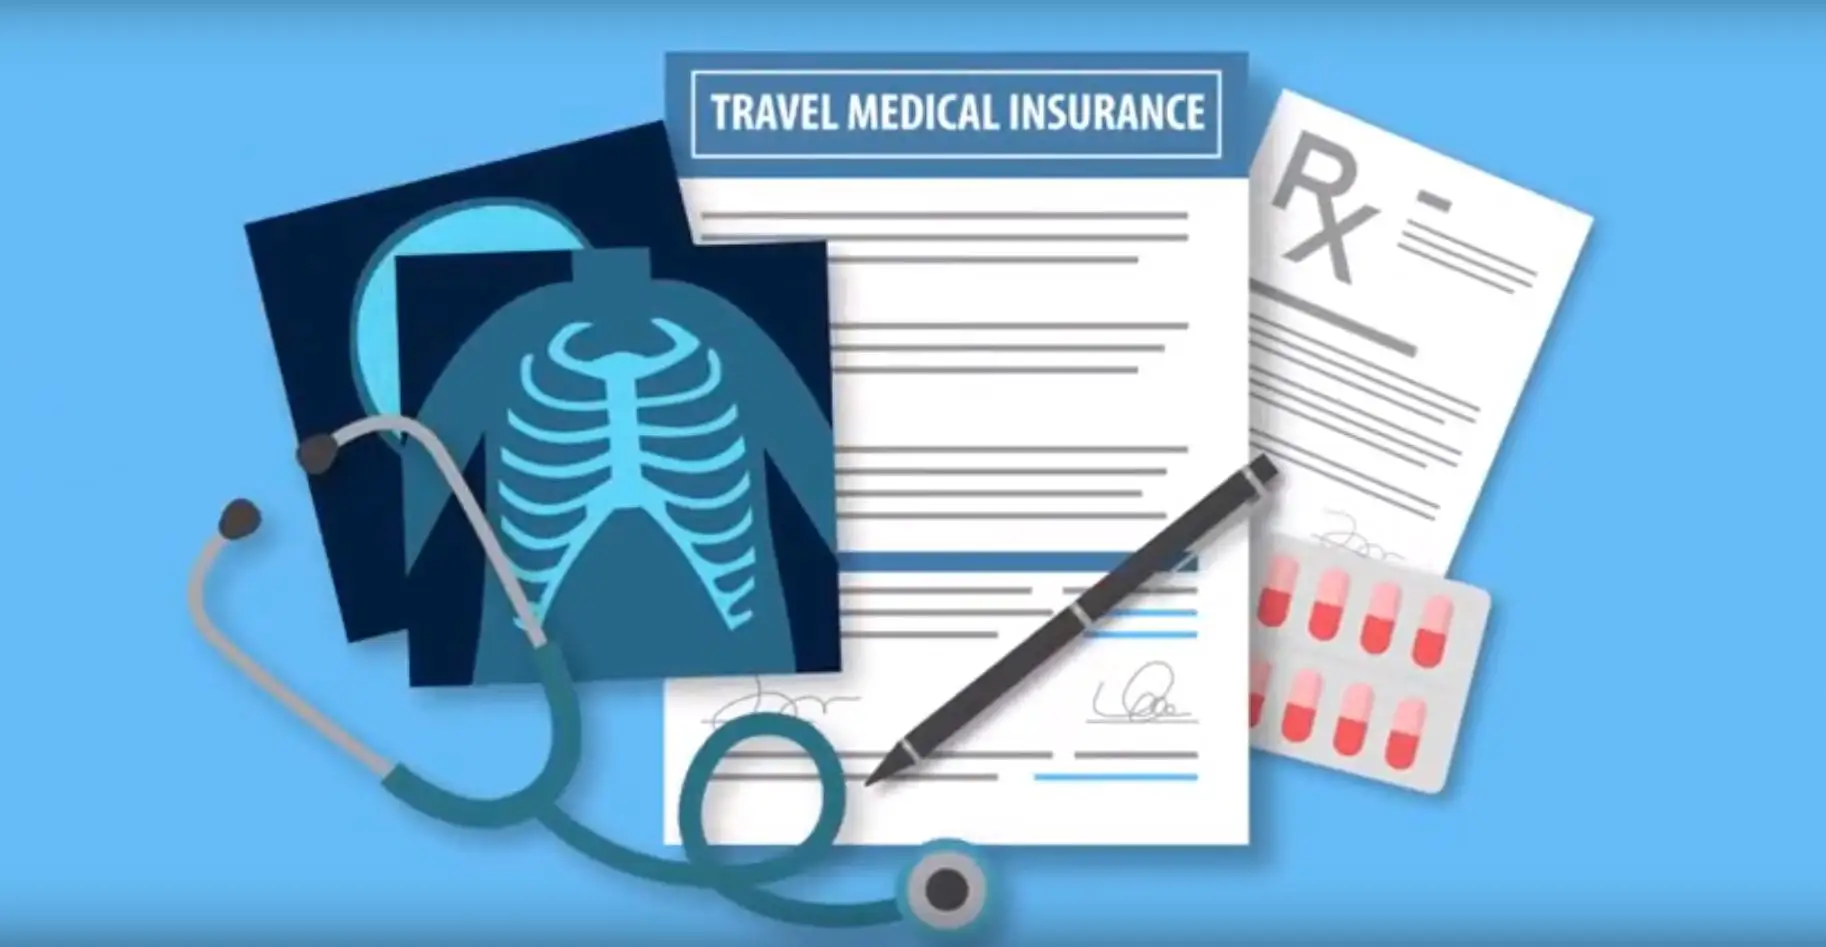 stethoscope-x-ray-travel-medical-policy-with-pen-sitting-on-it